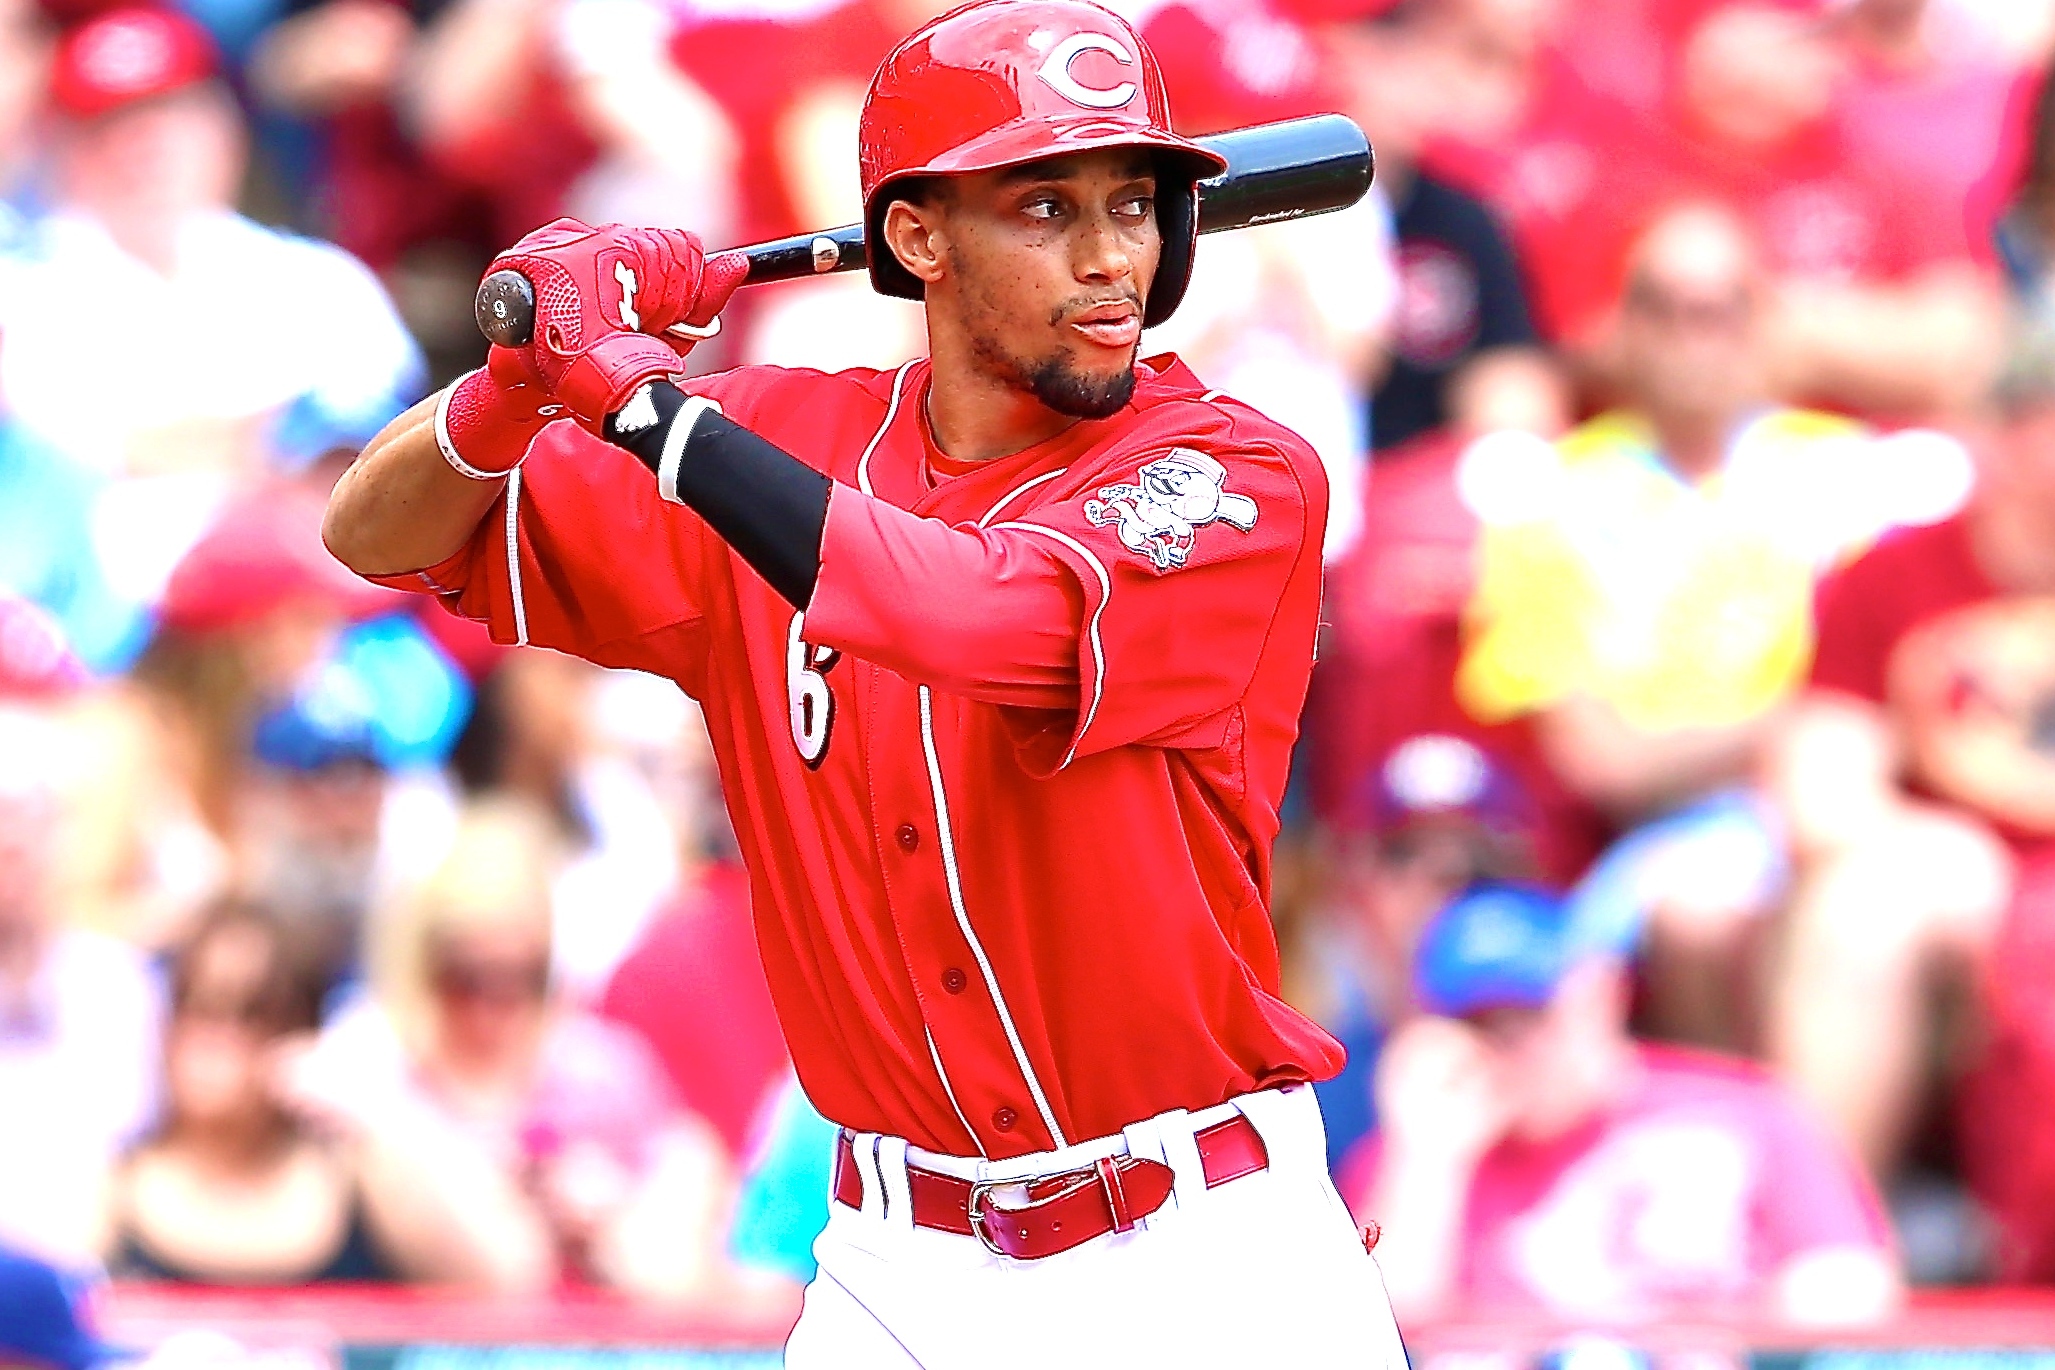 Why Billy Hamilton Will Never Hit Enough to Change MLB with His